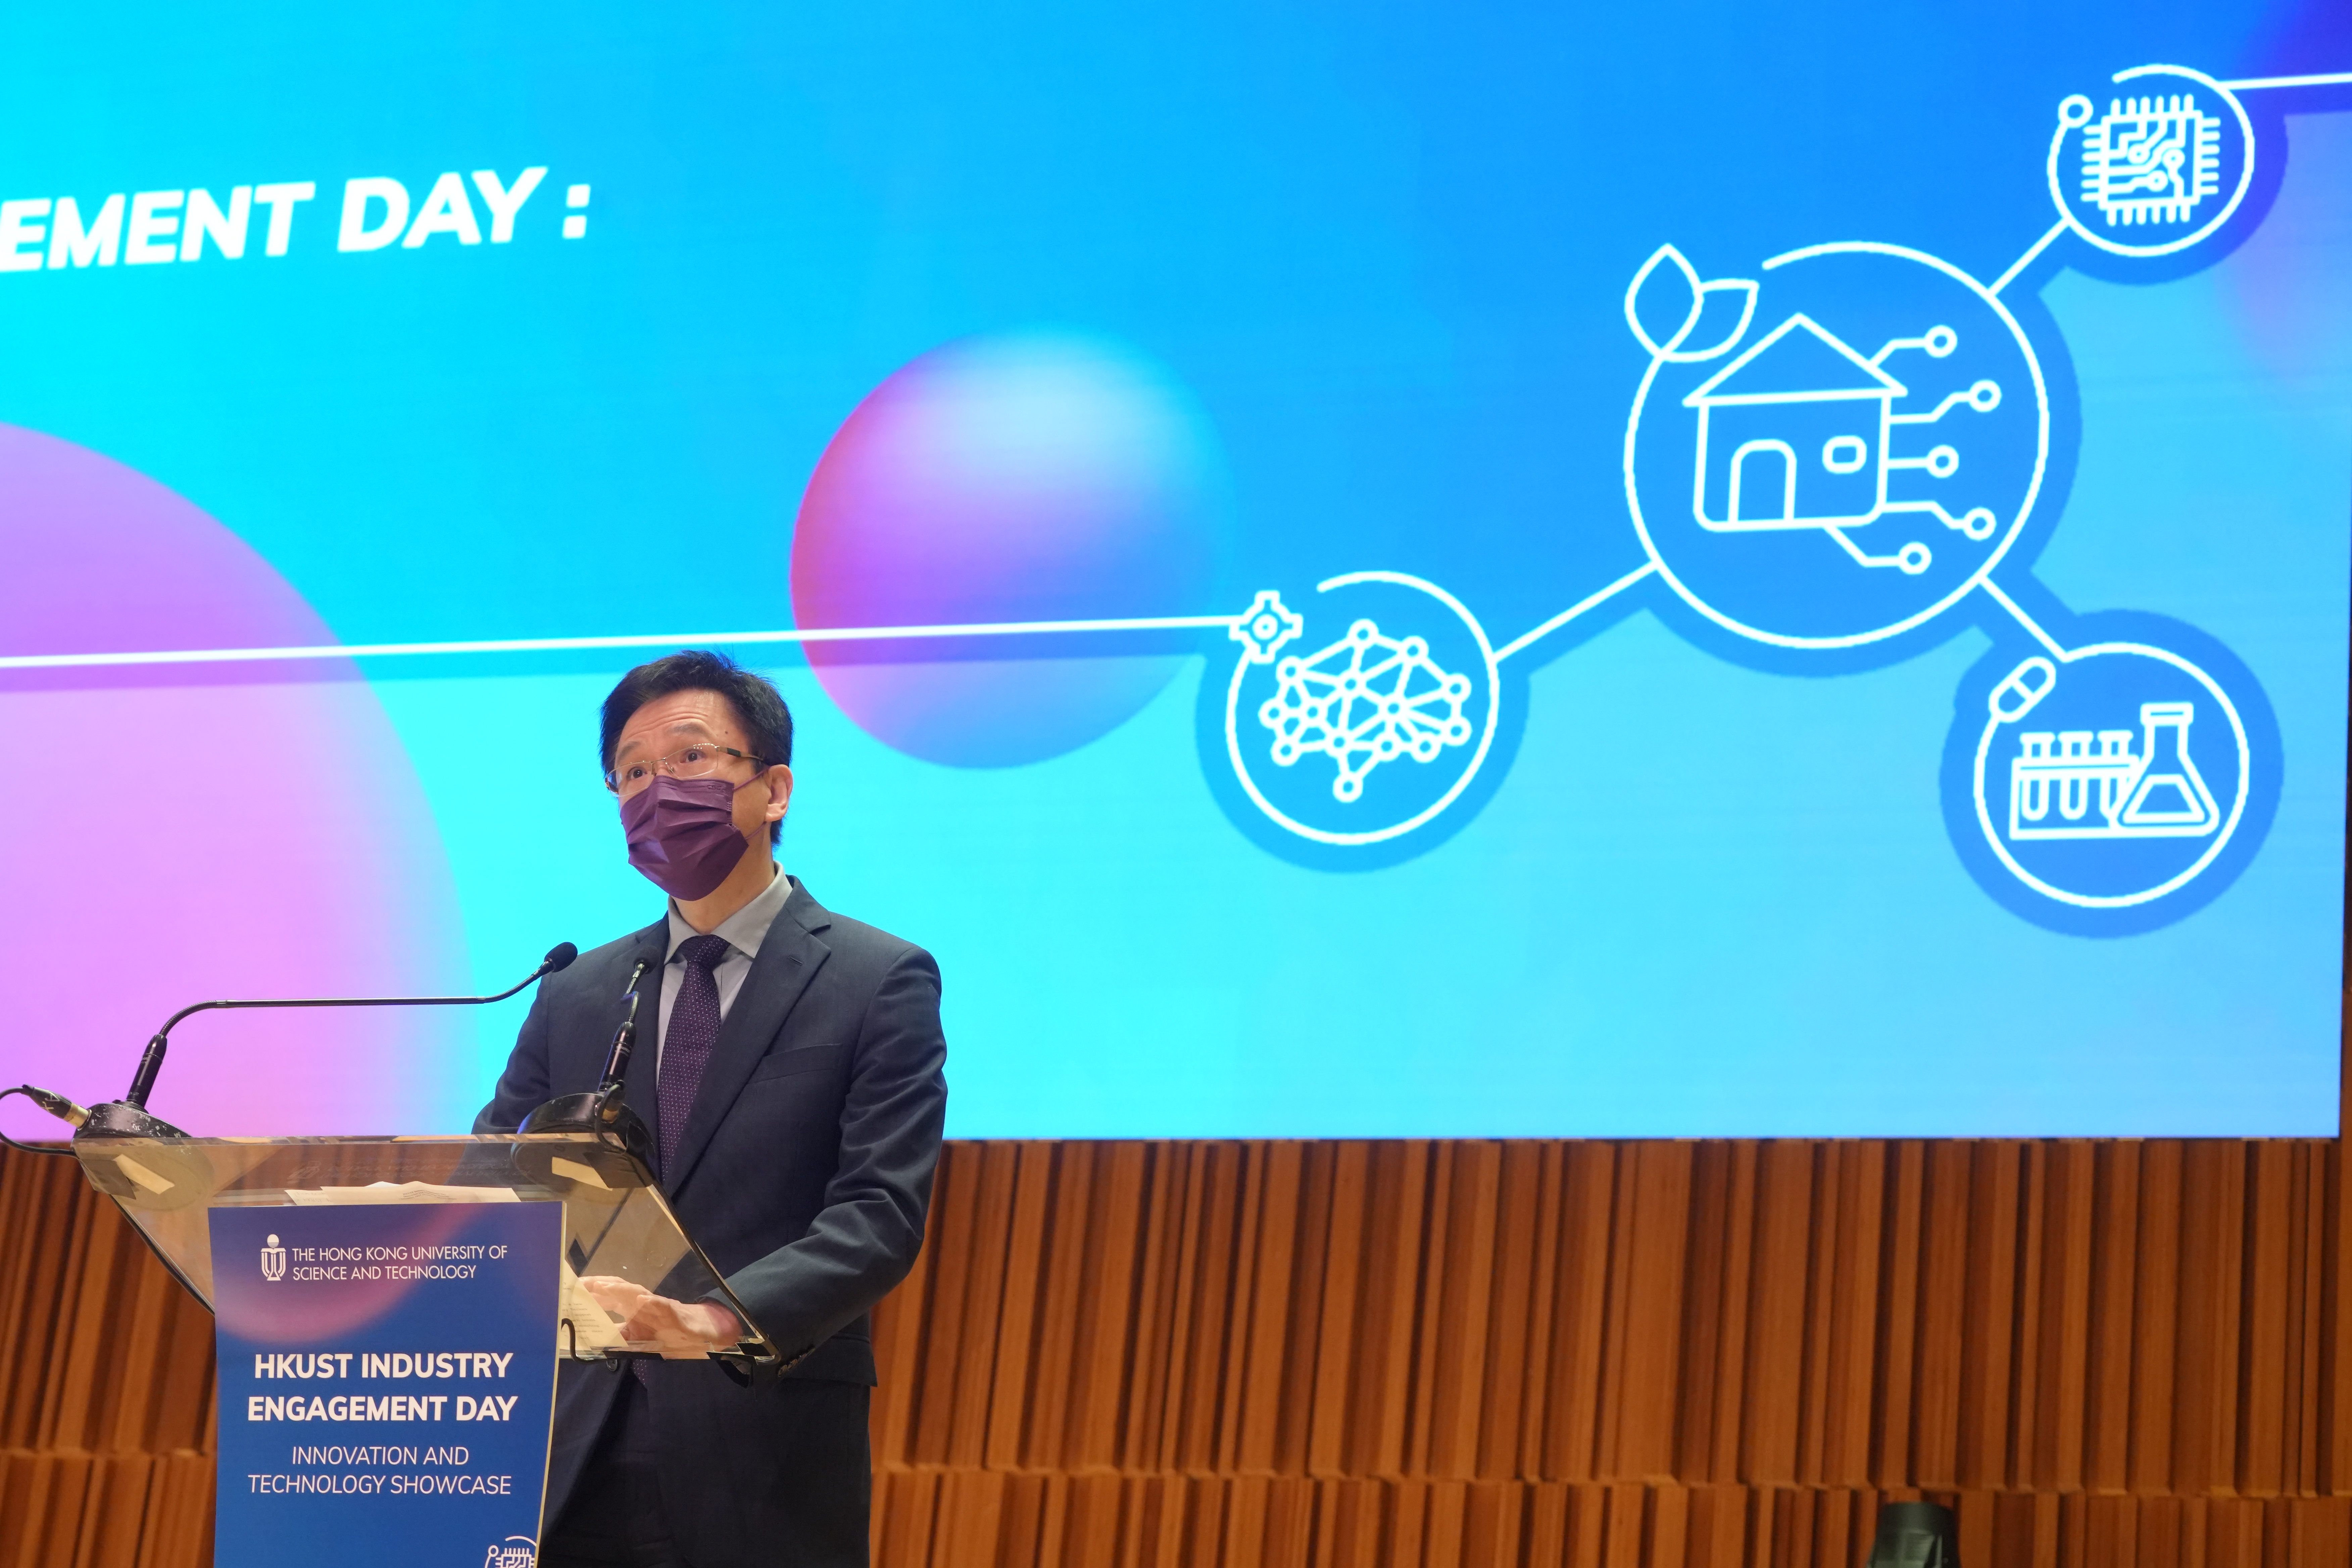 Prof. SUN Dong, Secretary for Innovation, Technology and Industry of the HKSAR delivers a speech at the session